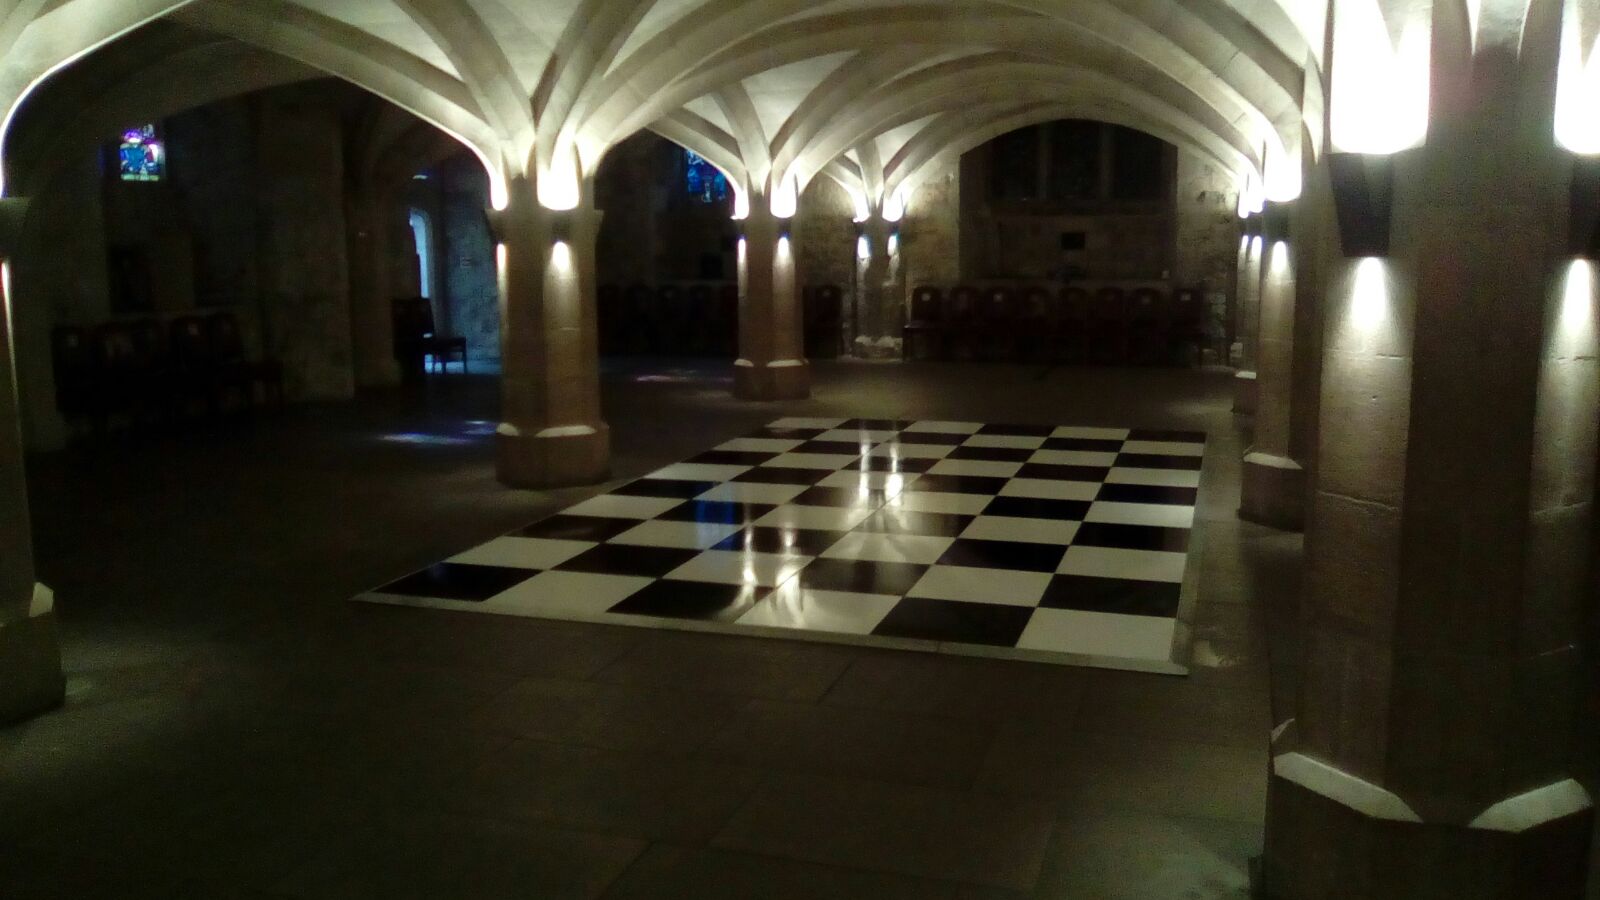 BW32 - Black and White Chequered - Guildhall Crypt